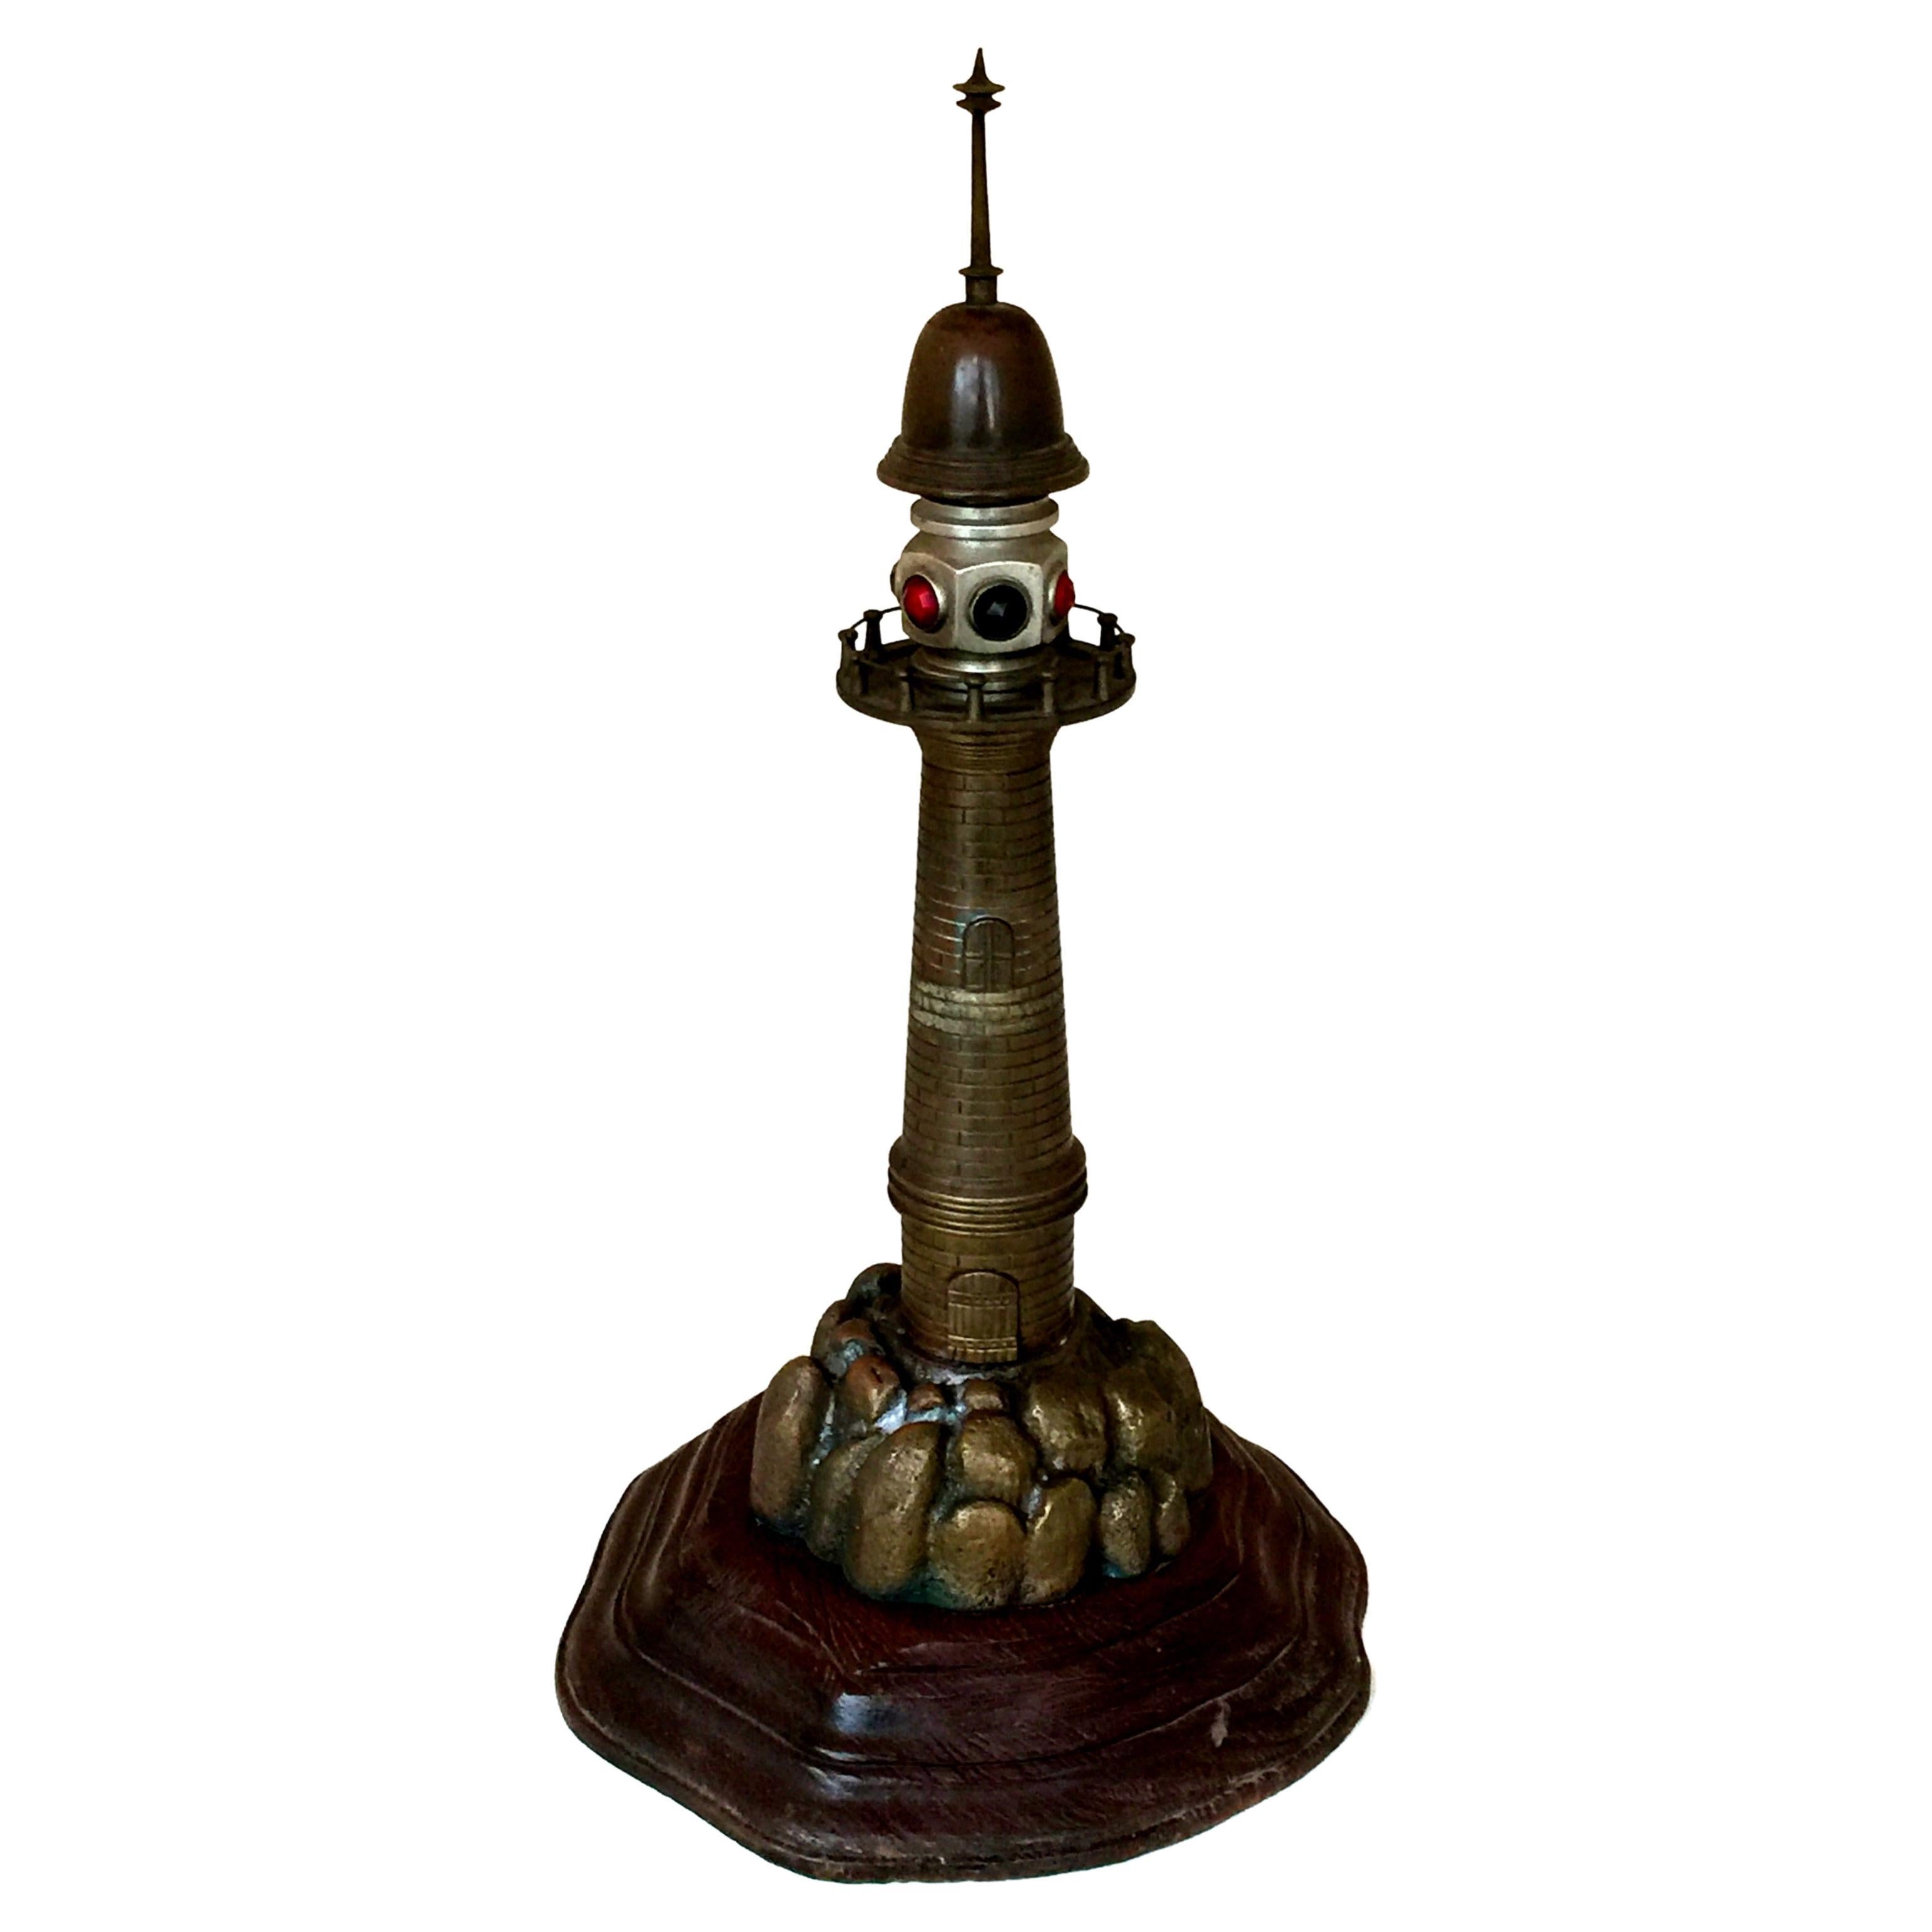 Lighthouse Art Deco Table Lamp, 1920, Material: Bronze and Wood, France